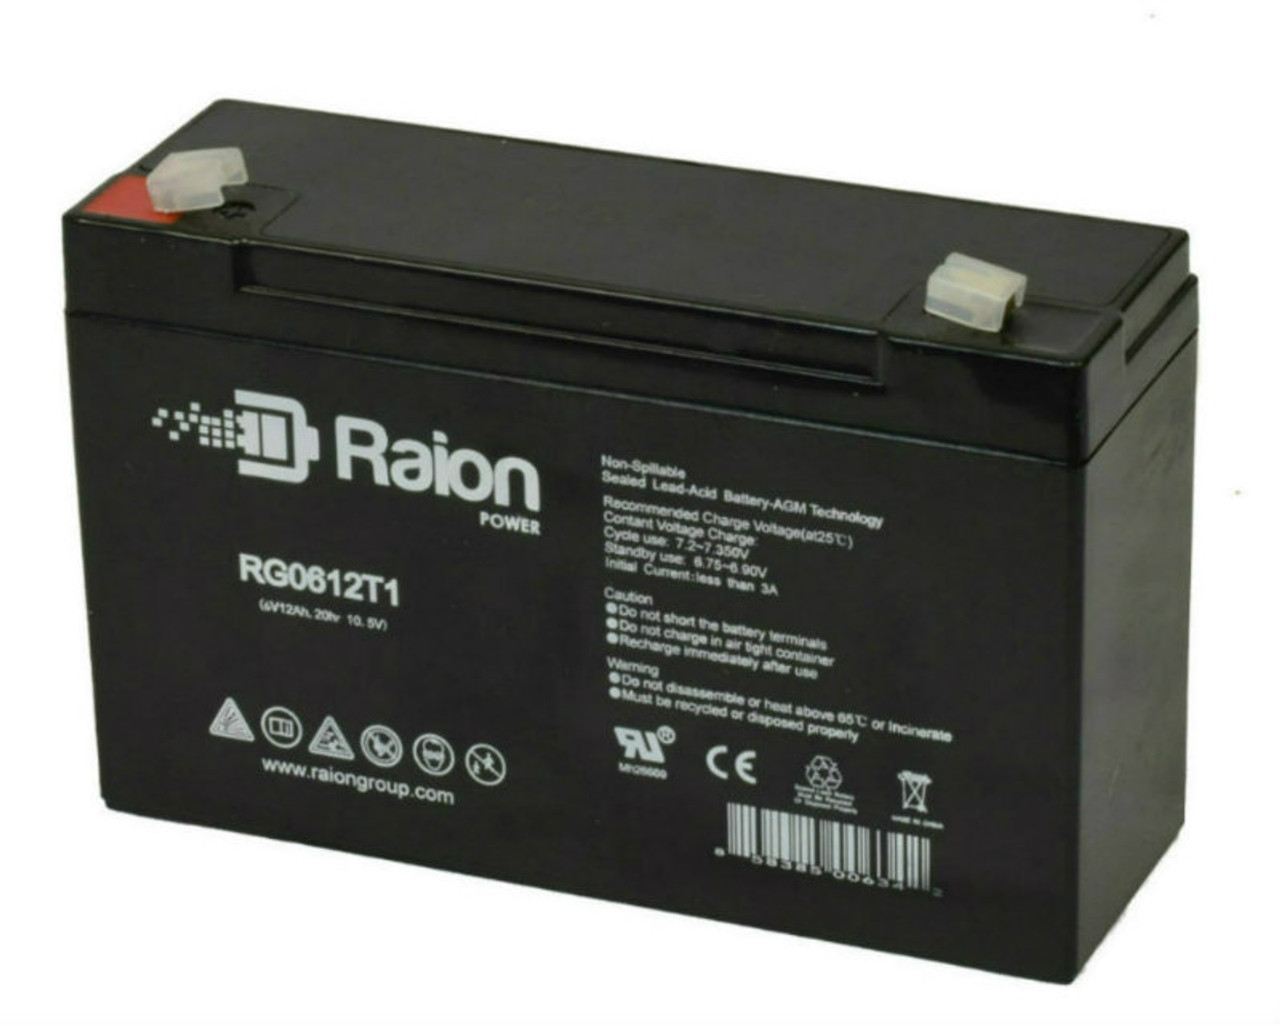 Raion Power RG06120T1 Replacement Battery for Douglas DBG6-10T